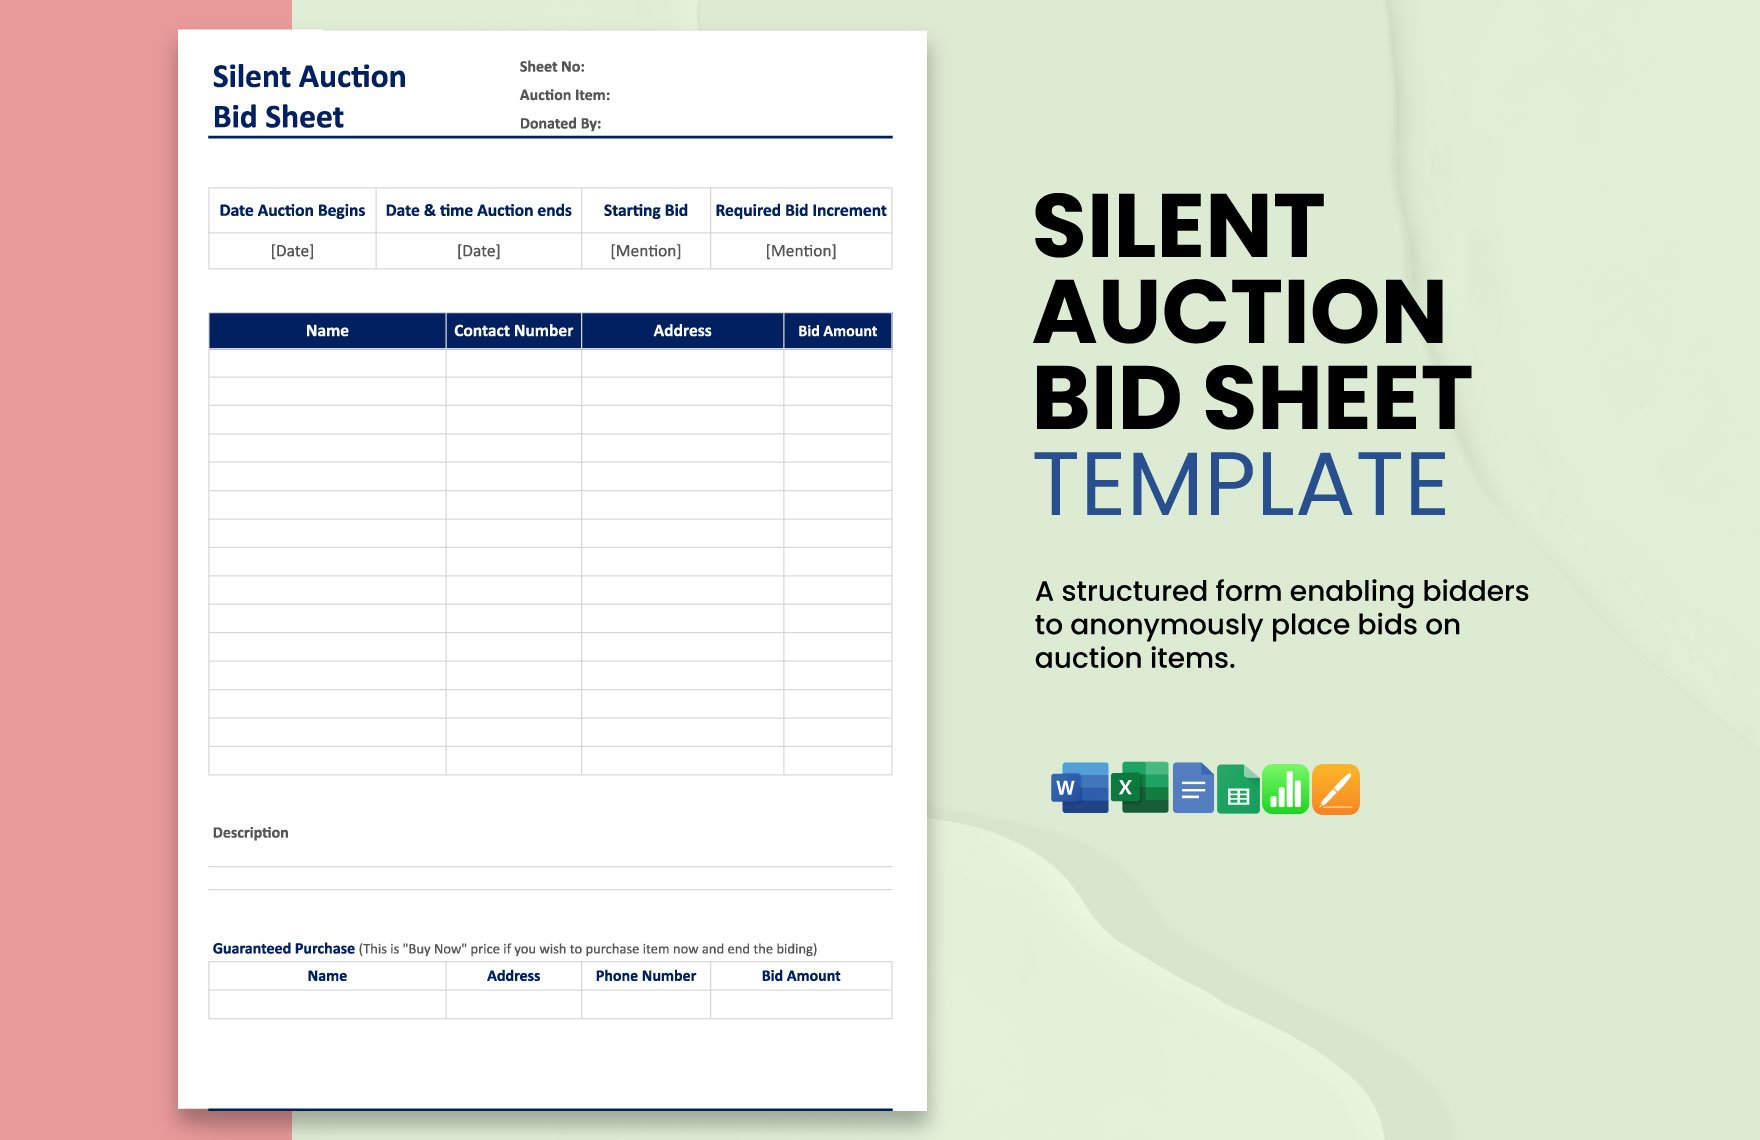 Silent Auction Bid Sheet Template in Word, Google Docs, Excel, Google Sheets, Apple Pages, Apple Numbers